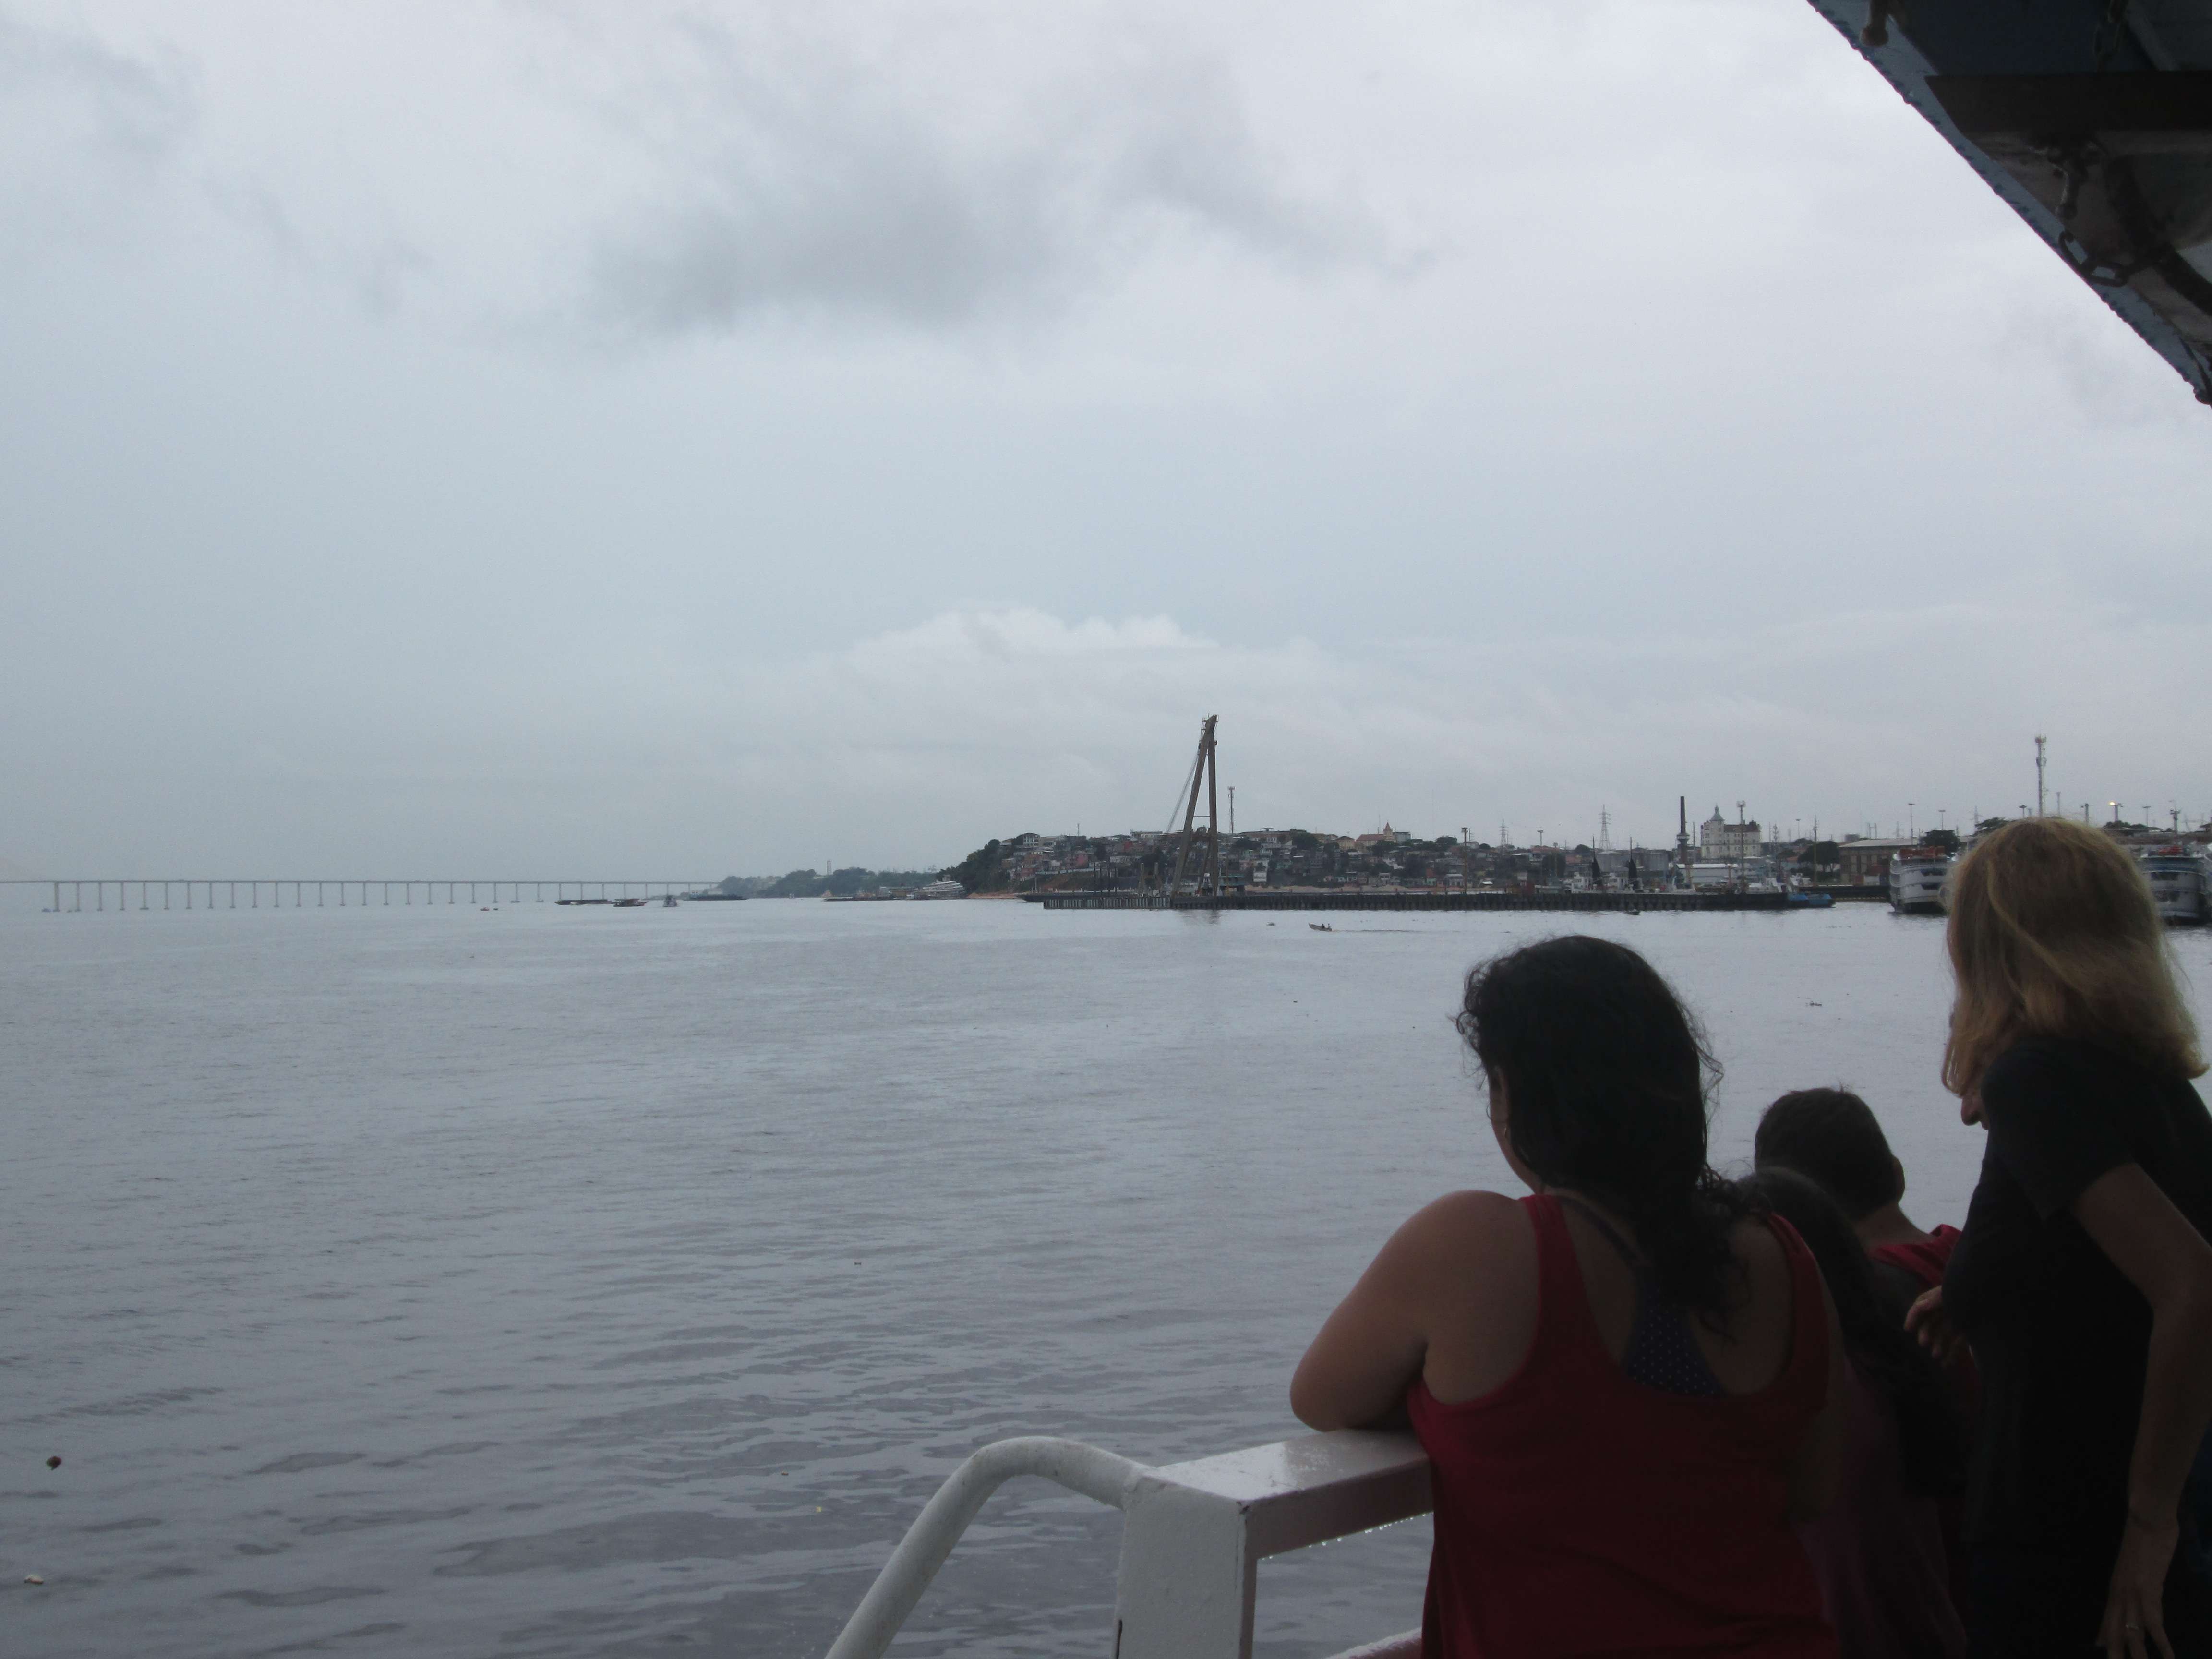 Looking back at Manaus as the boat departs